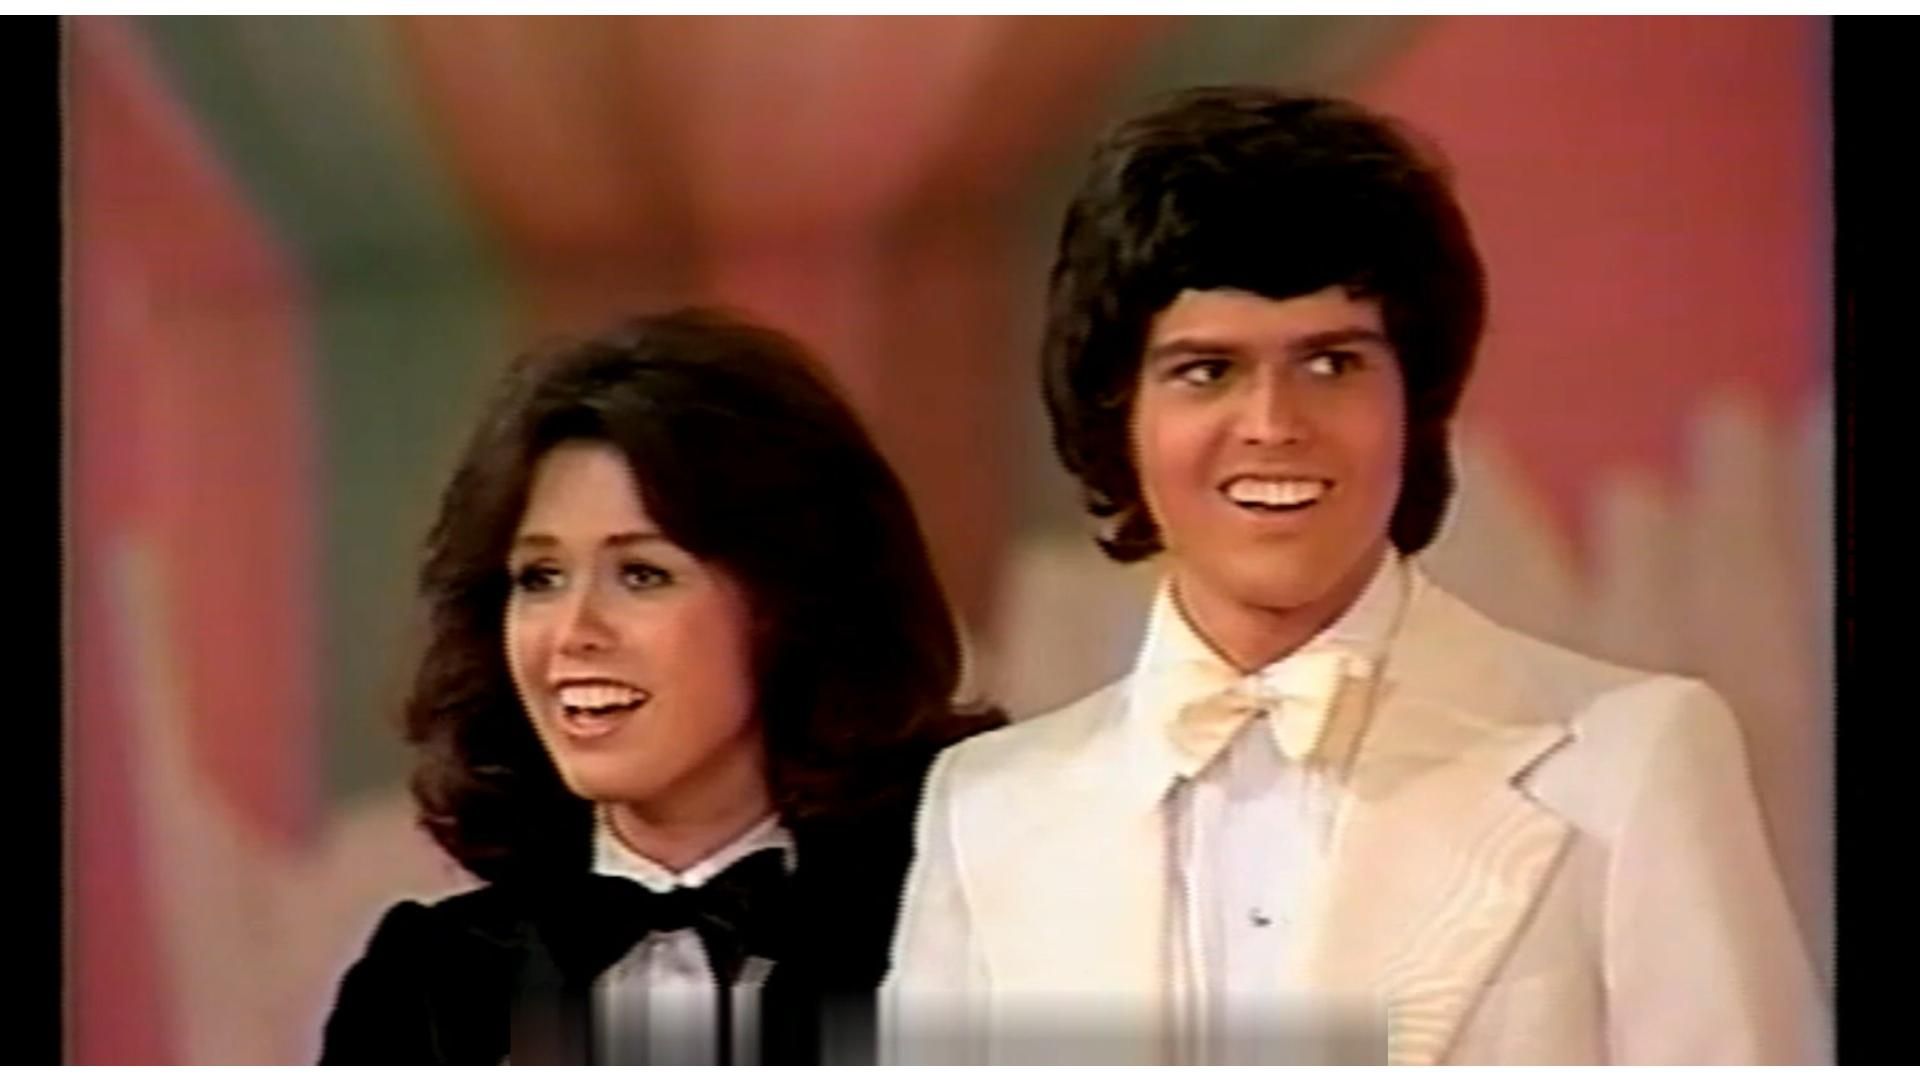 Donny and Marie background